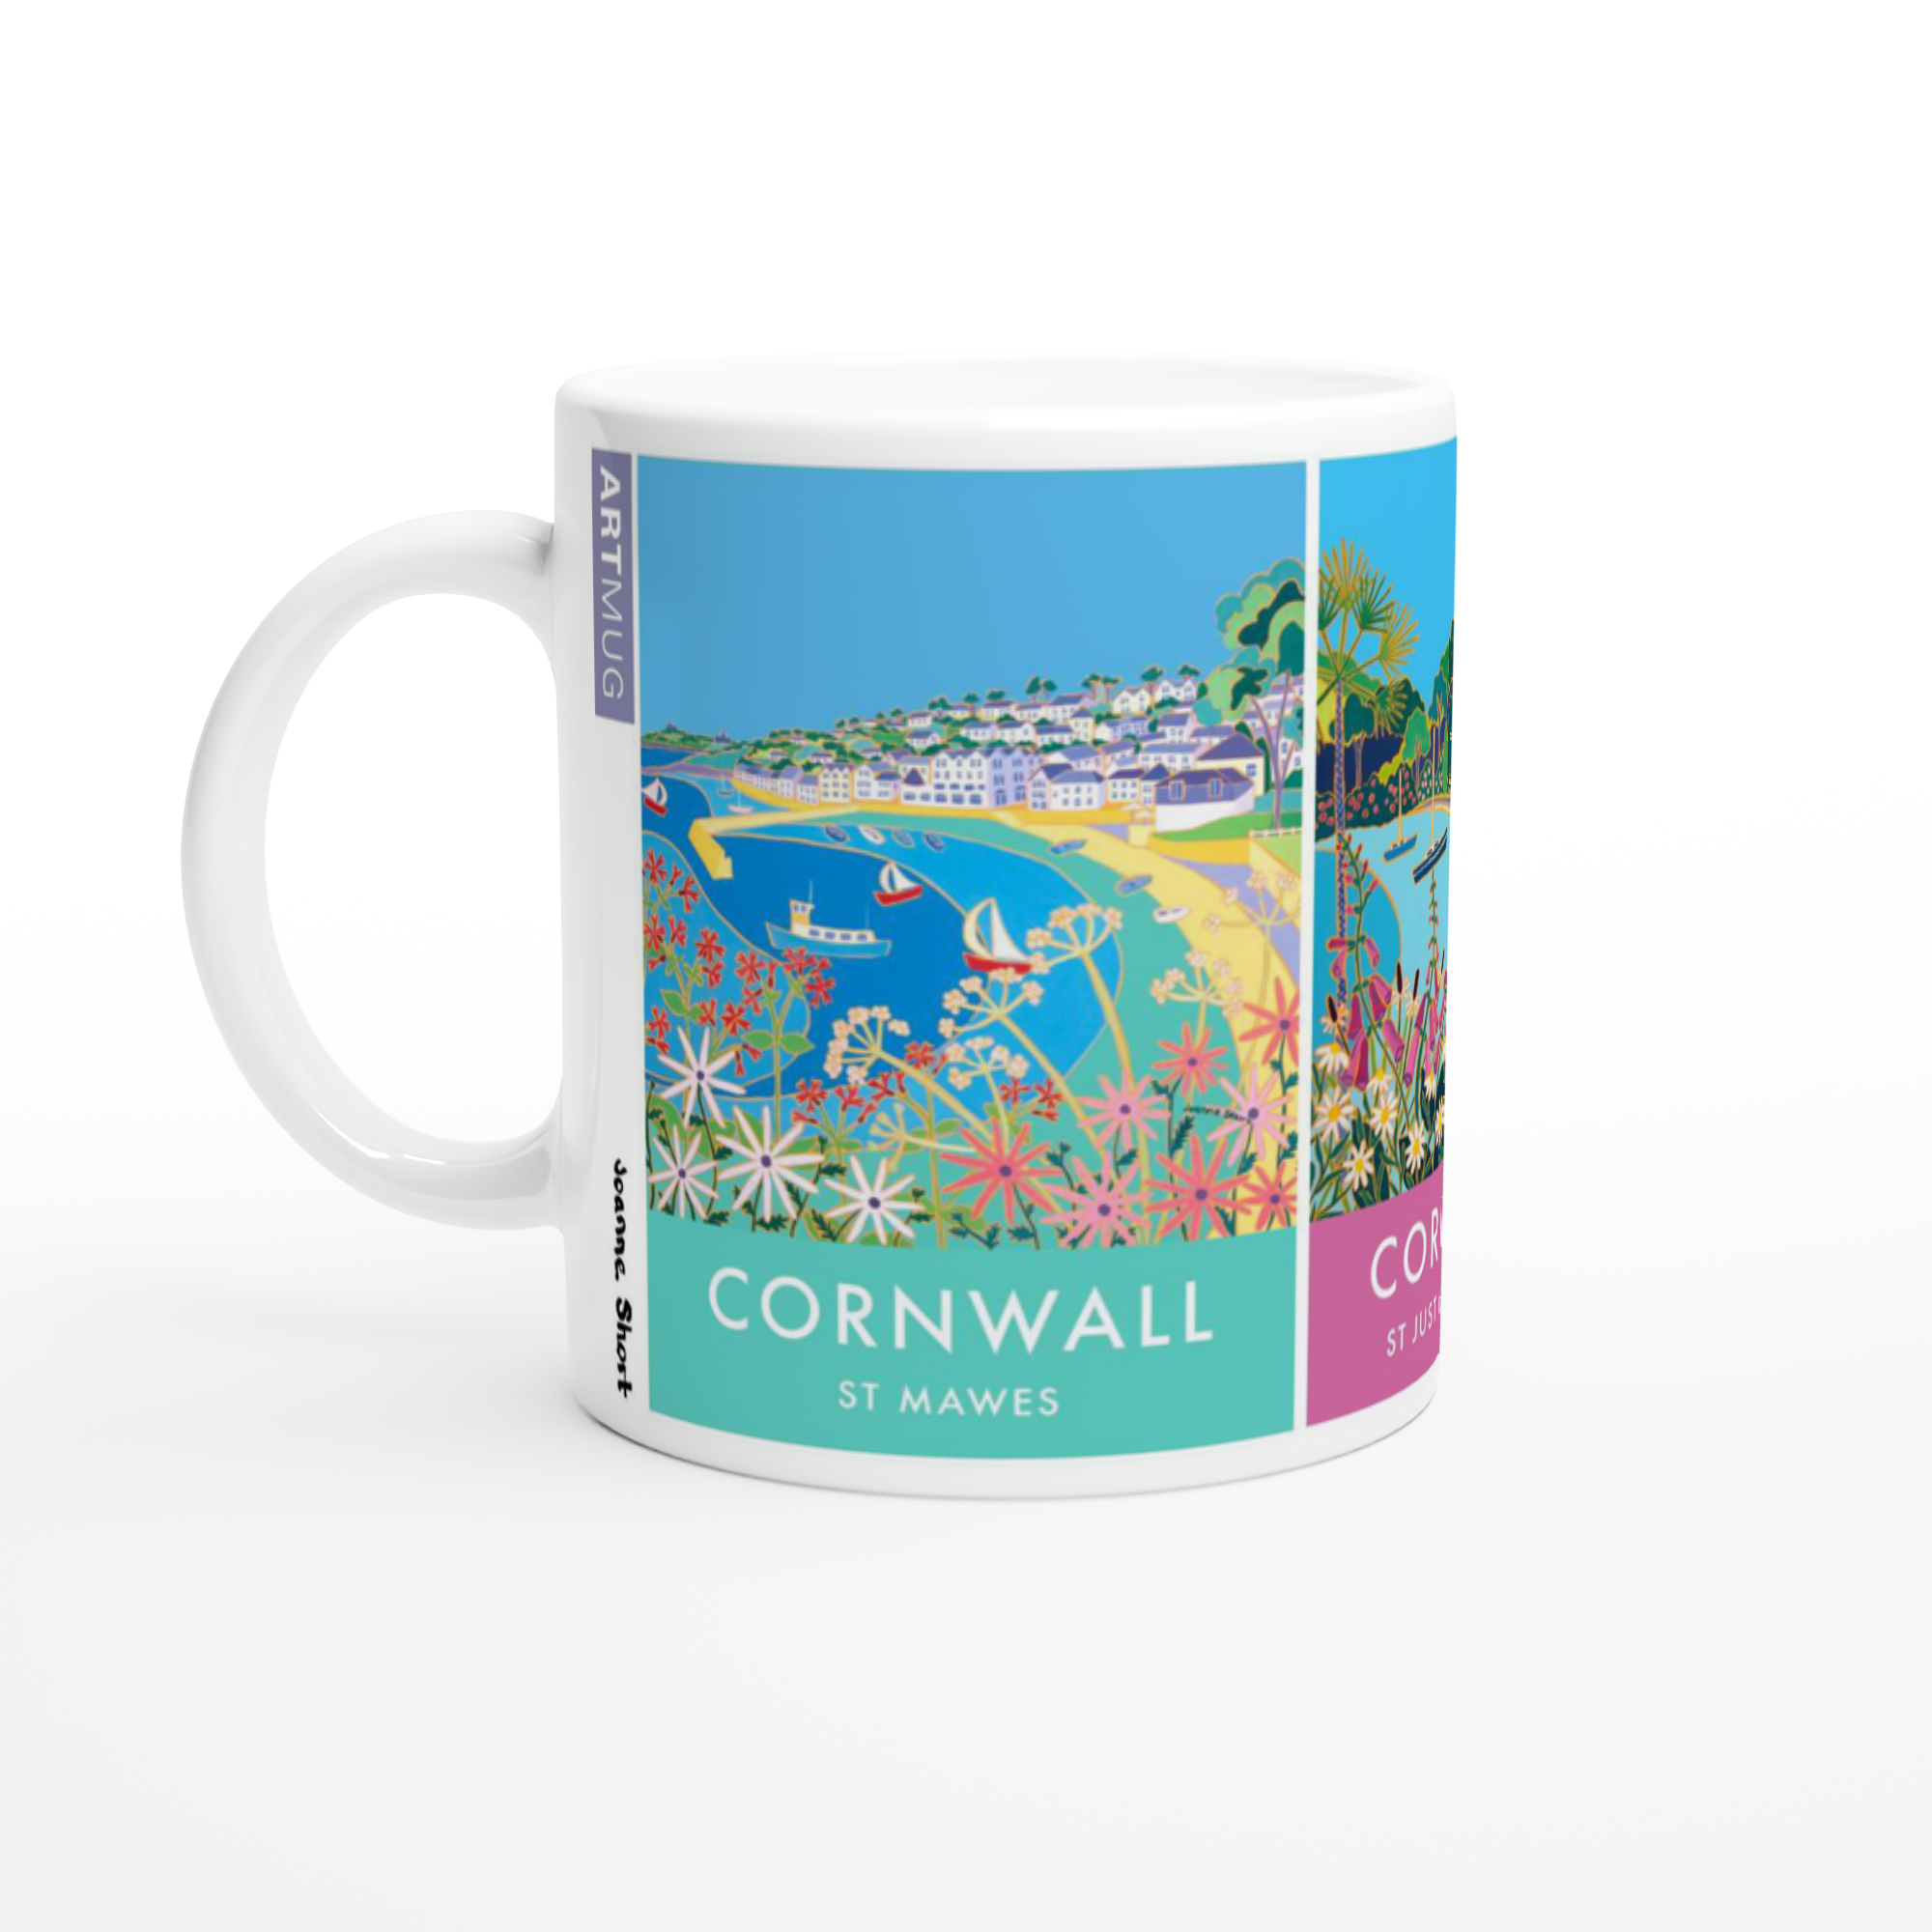 Cornish Art Mug featuring St Mawes, St Just in Roseland and St Anthony's Lighthouse by artist Joanne Short